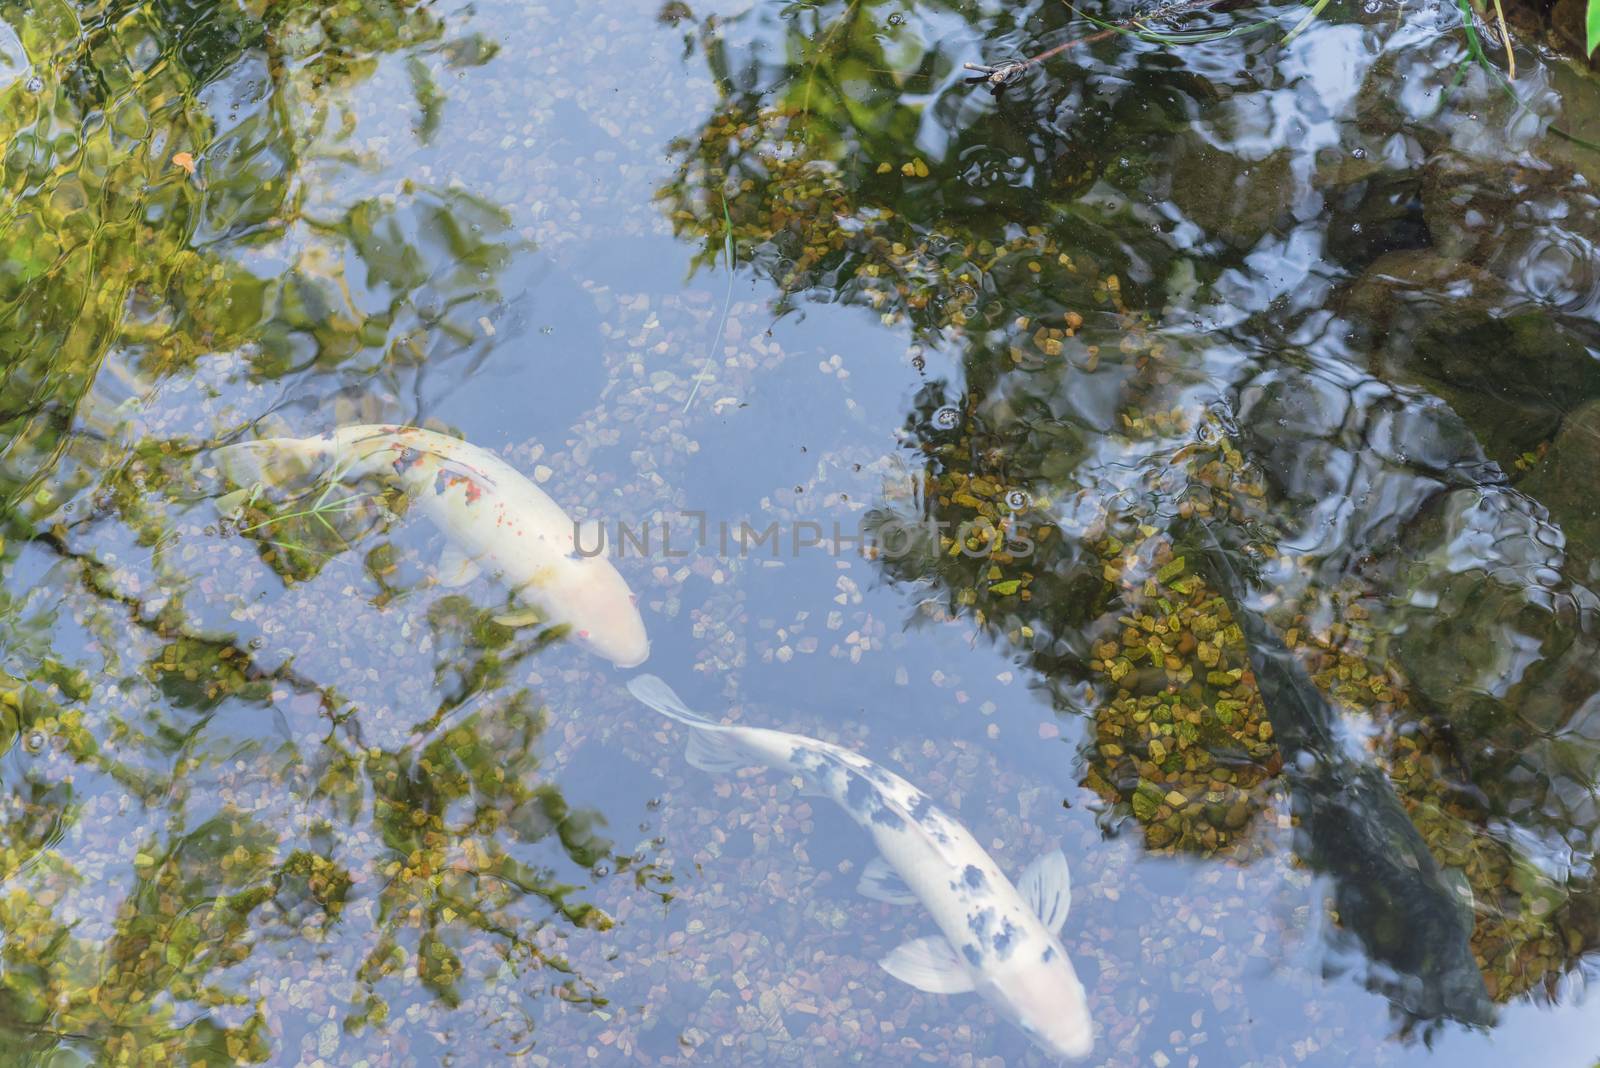 Top view three beautiful koi fishes swimming at clear pond in botanic garden near Dallas, Texas, USA by trongnguyen